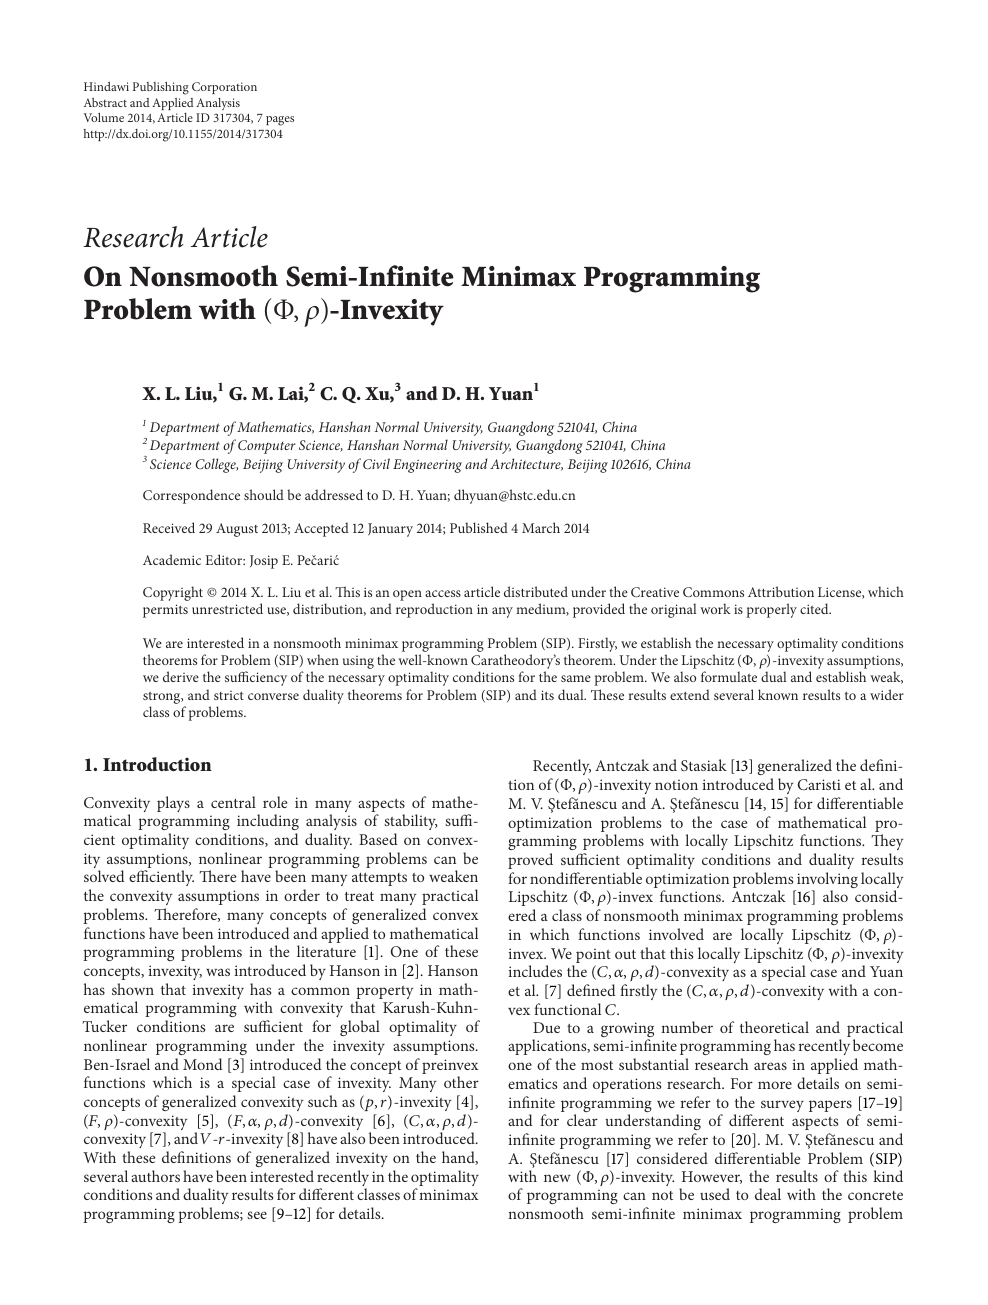 On Nonsmooth Semi Infinite Minimax Programming Problem With Invexity Topic Of Research Paper In Mathematics Download Scholarly Article Pdf And Read For Free On Cyberleninka Open Science Hub